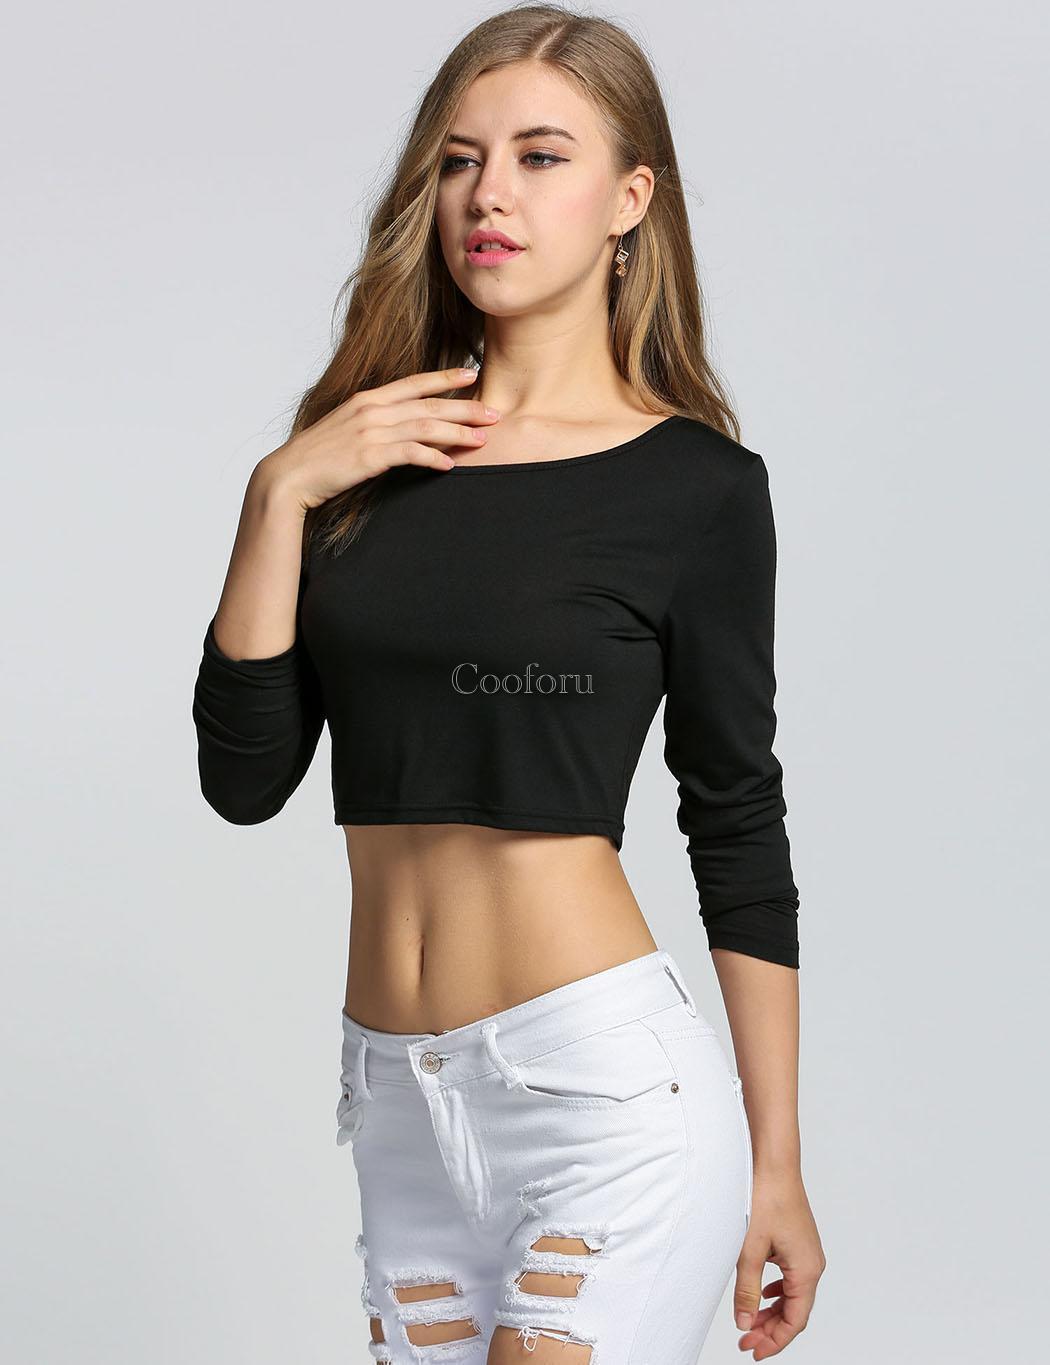 Womens Ladies Sexy Scoop Neck Tight Fitted Tops LONG SLEEVE Crop Top T